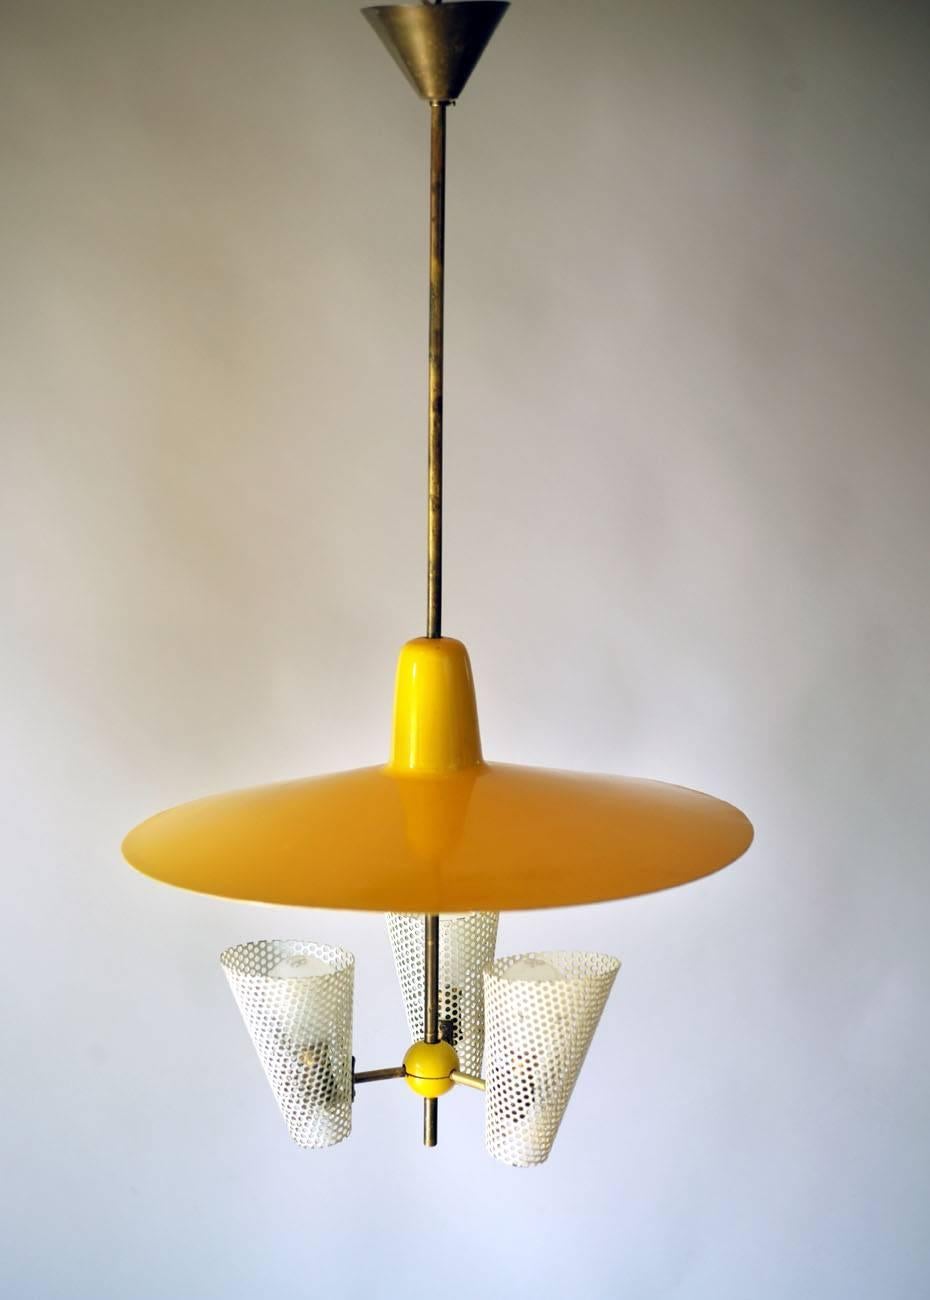 French Vintage Suspension Lamp, 1955